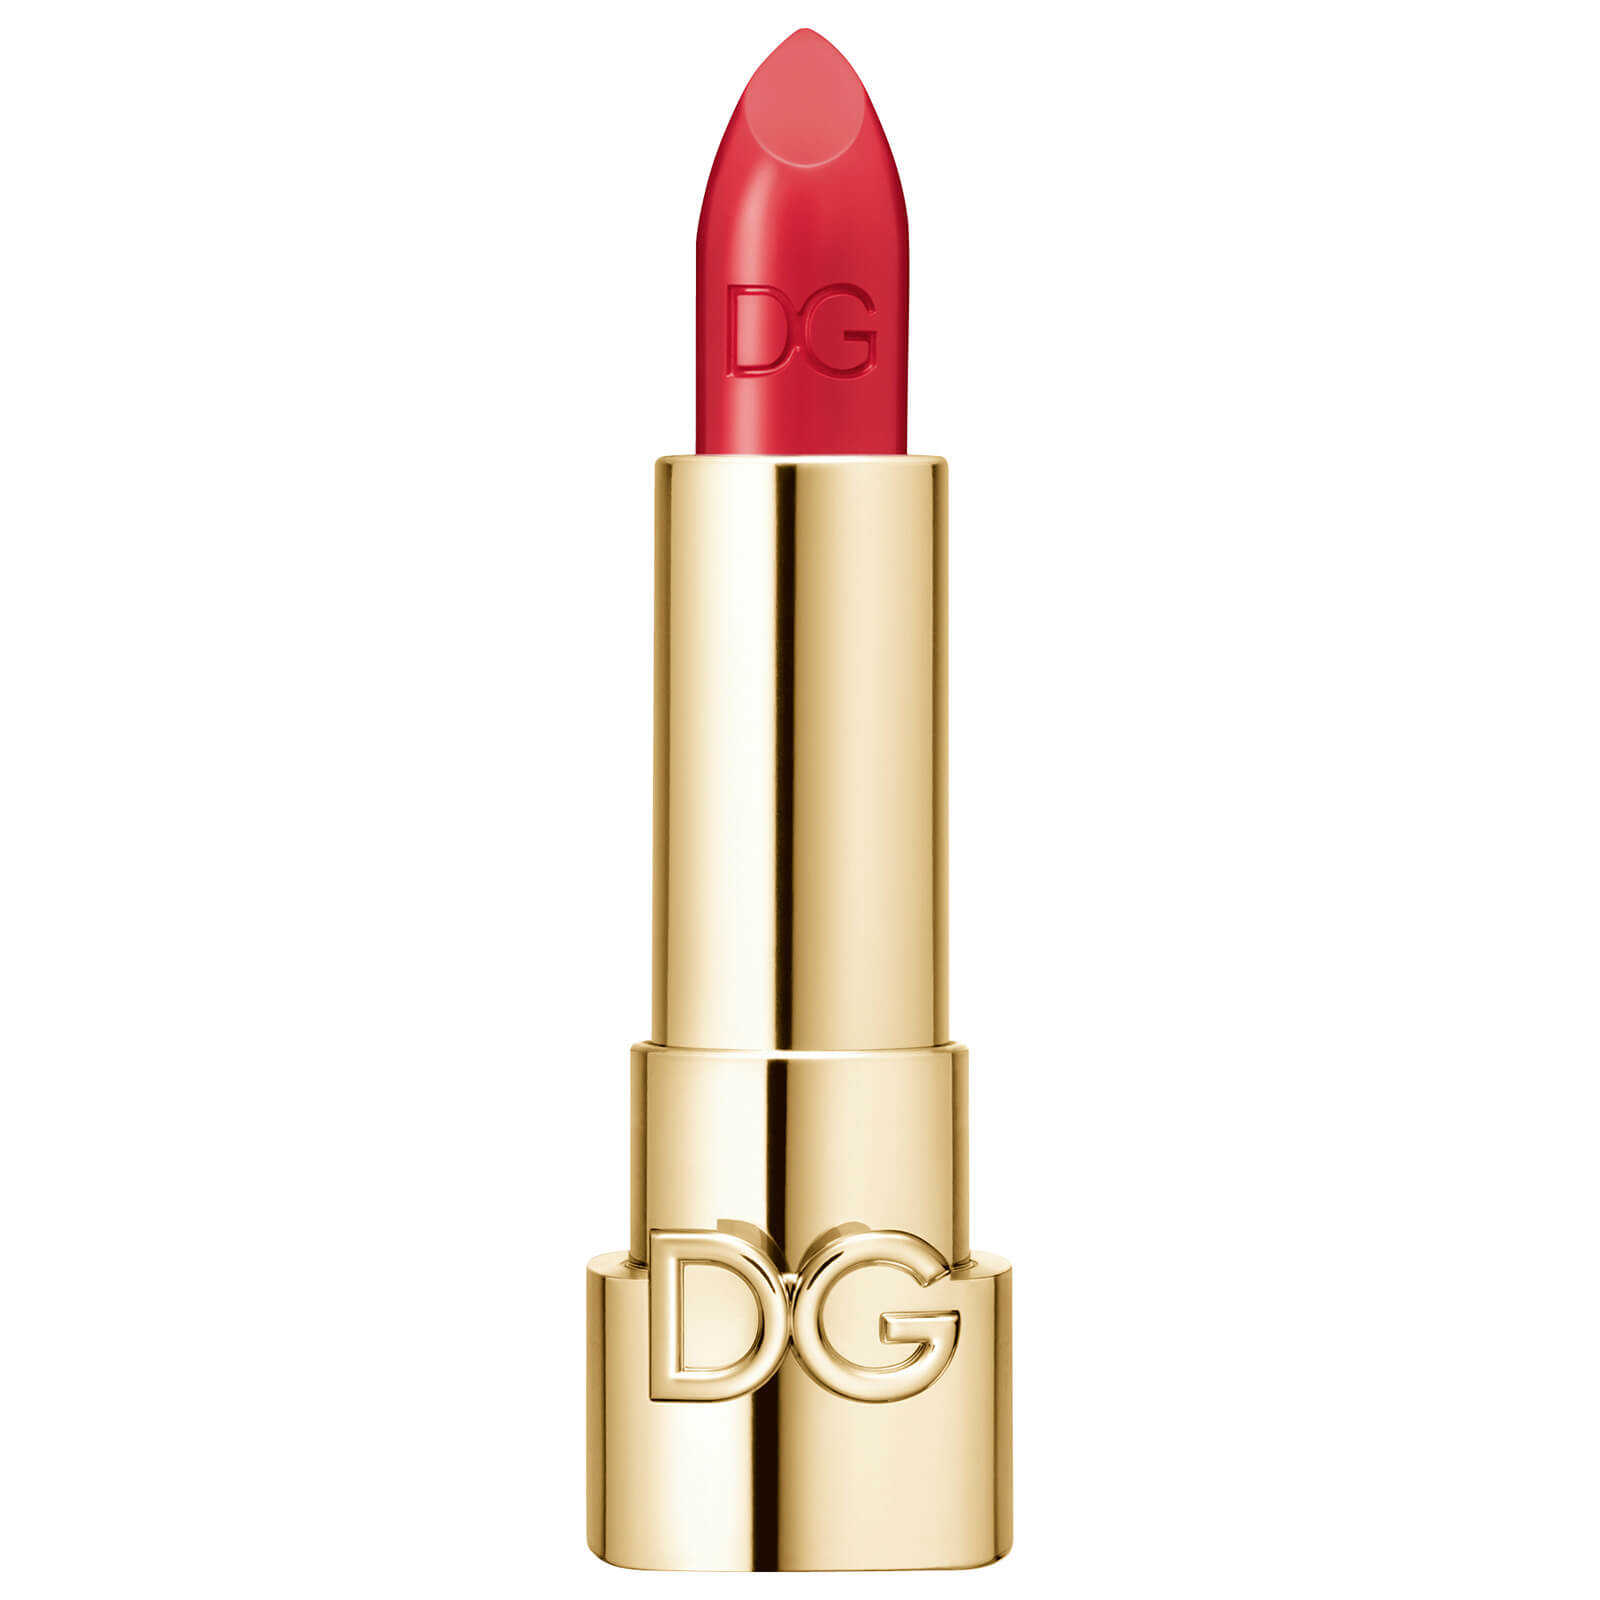 Image of Dolce&Gabbana The Only One Lipstick 1.7g (No Cap) (Various Shades) - 630 #DGLOVER